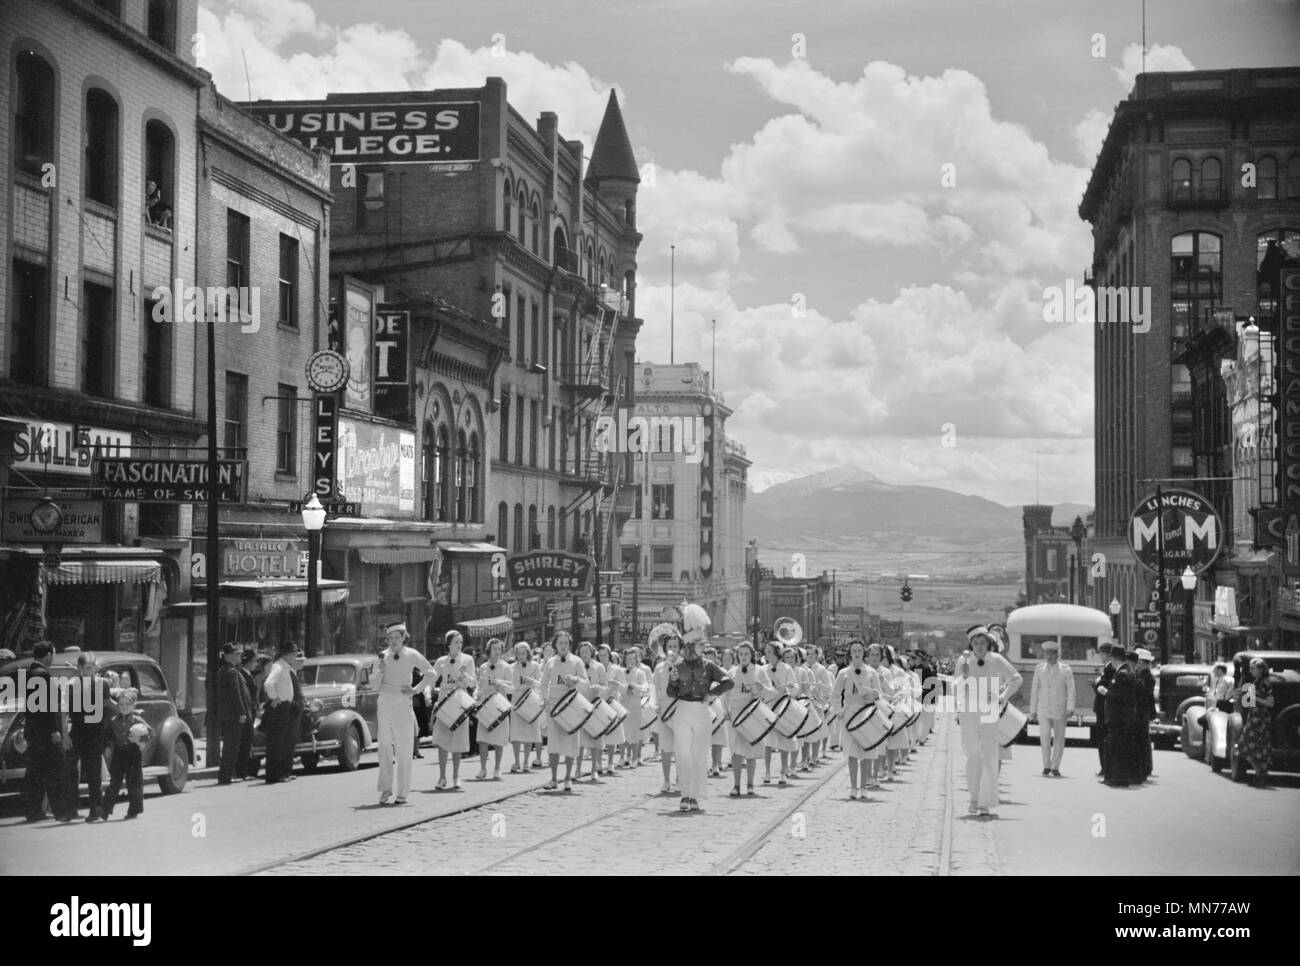 High School Band Marching in Parade, Montana Street, Butte, Montana, USA, Arthur Rothstein for Farm Security Administration, July 1939 Stock Photo